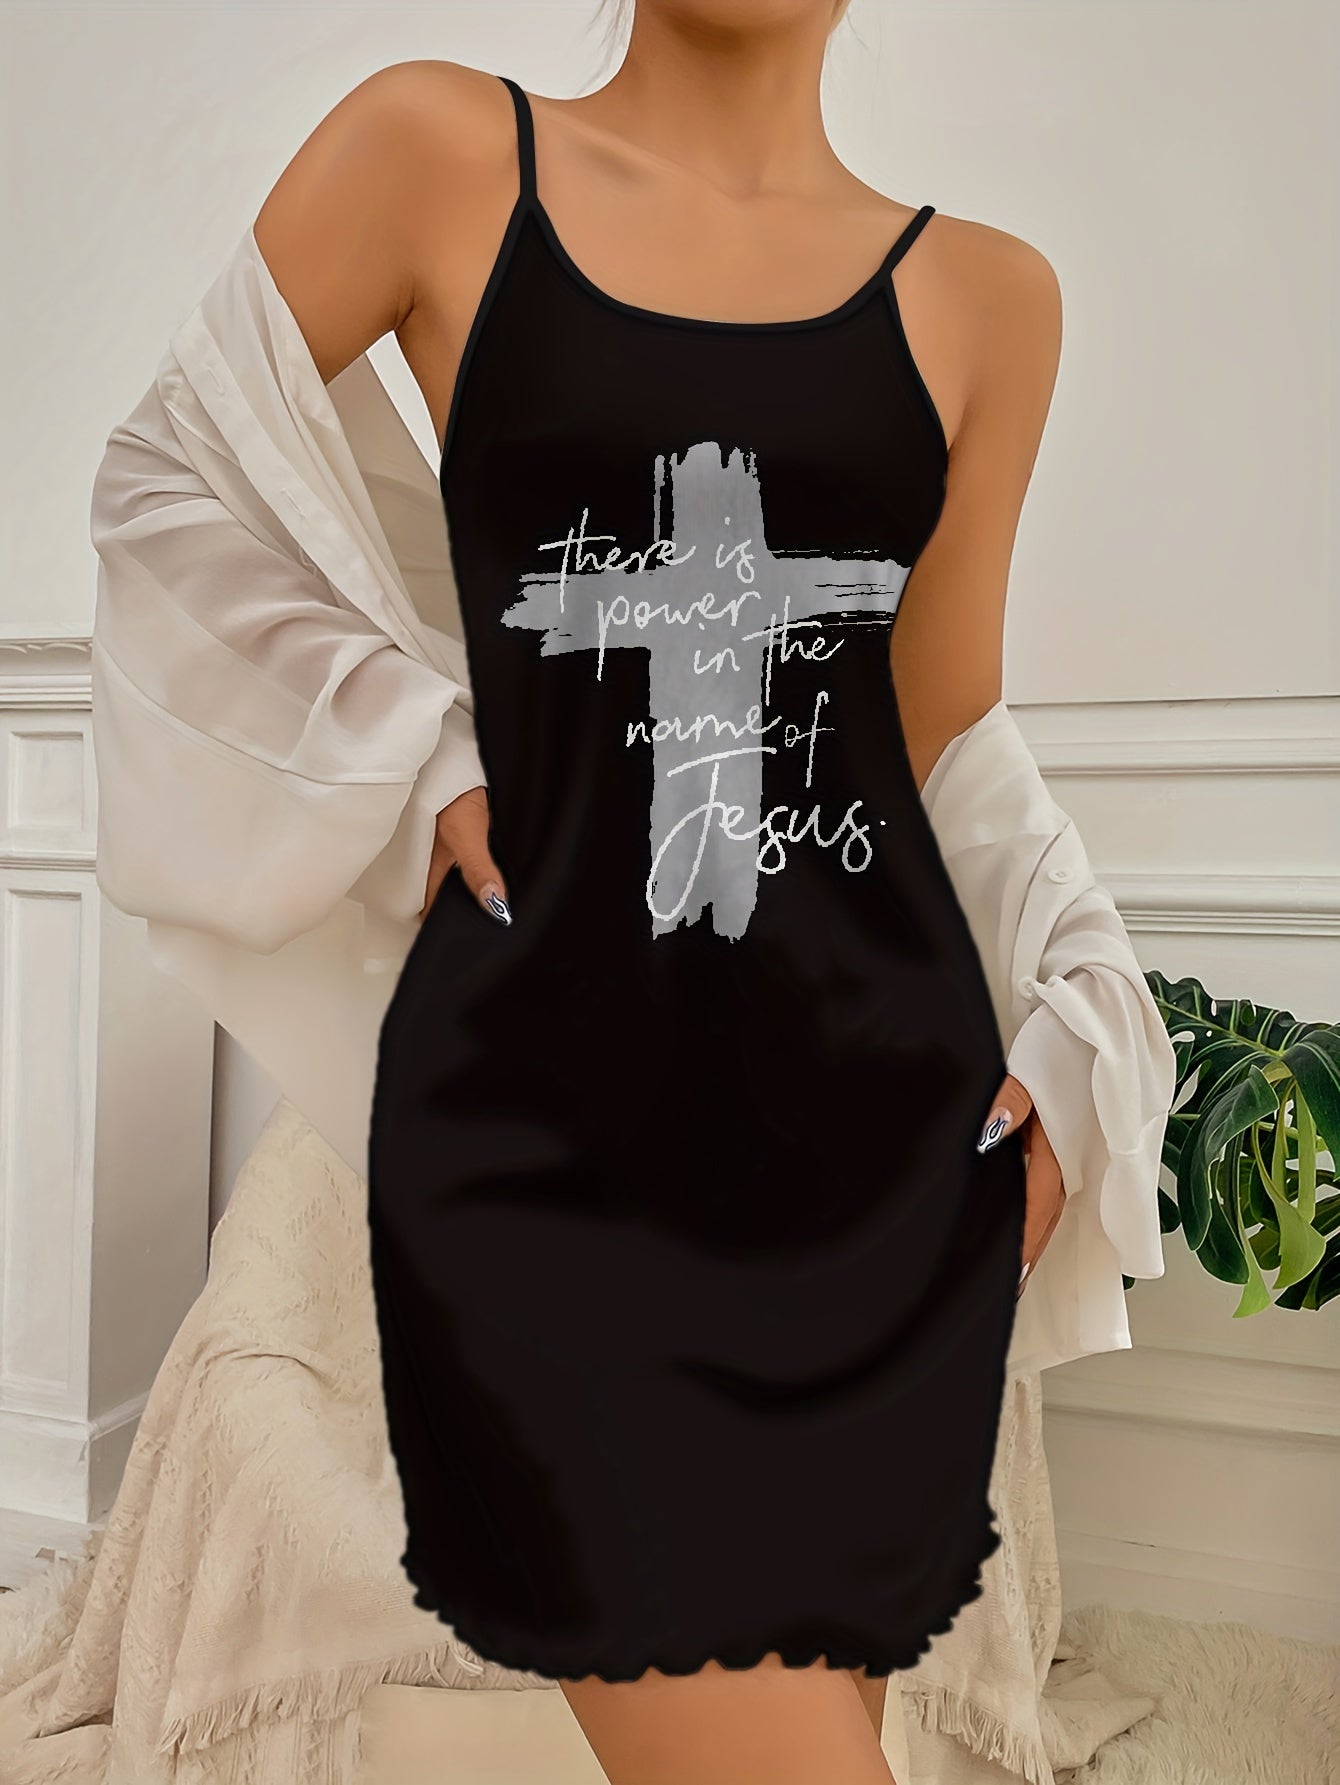 There Is Power In The Name Of Jesus Women's Christian Pajama Dress claimedbygoddesigns